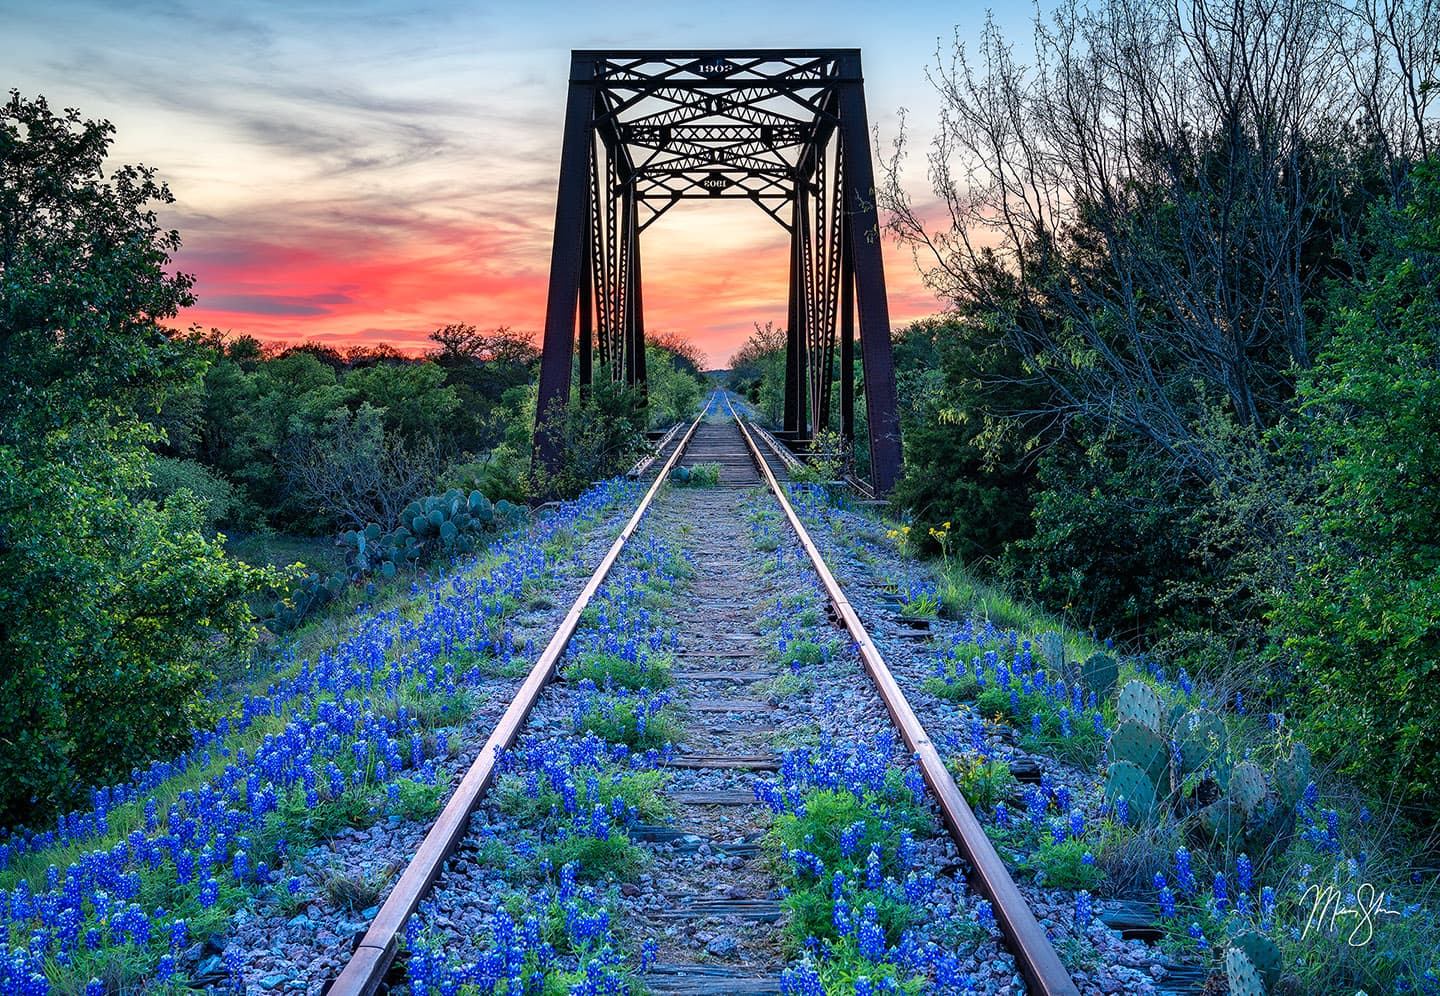 Texas photography: Bluebonnets, Ennis & the Texas Hill Country